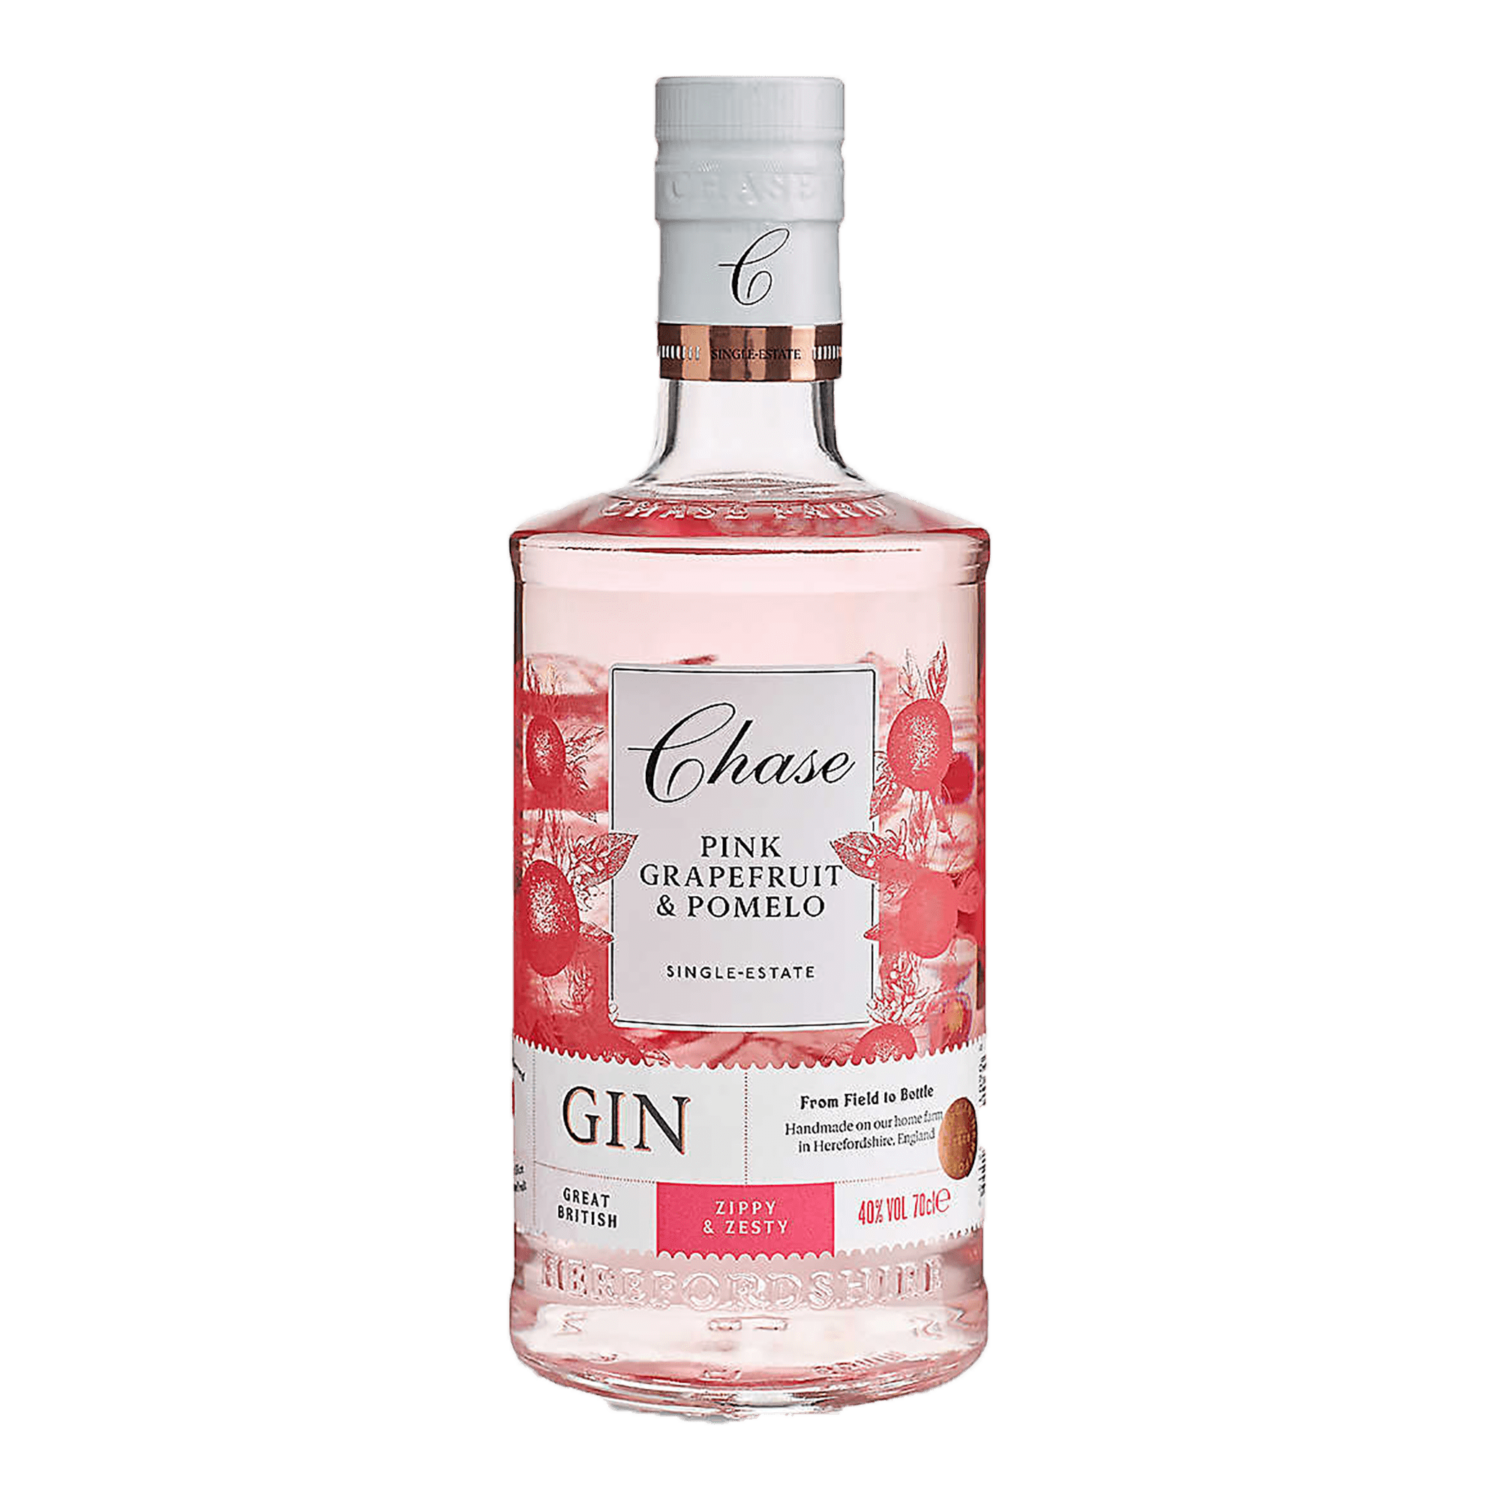 Williams Chase Pink Grapefruit & Pomelo Gin 0.7l